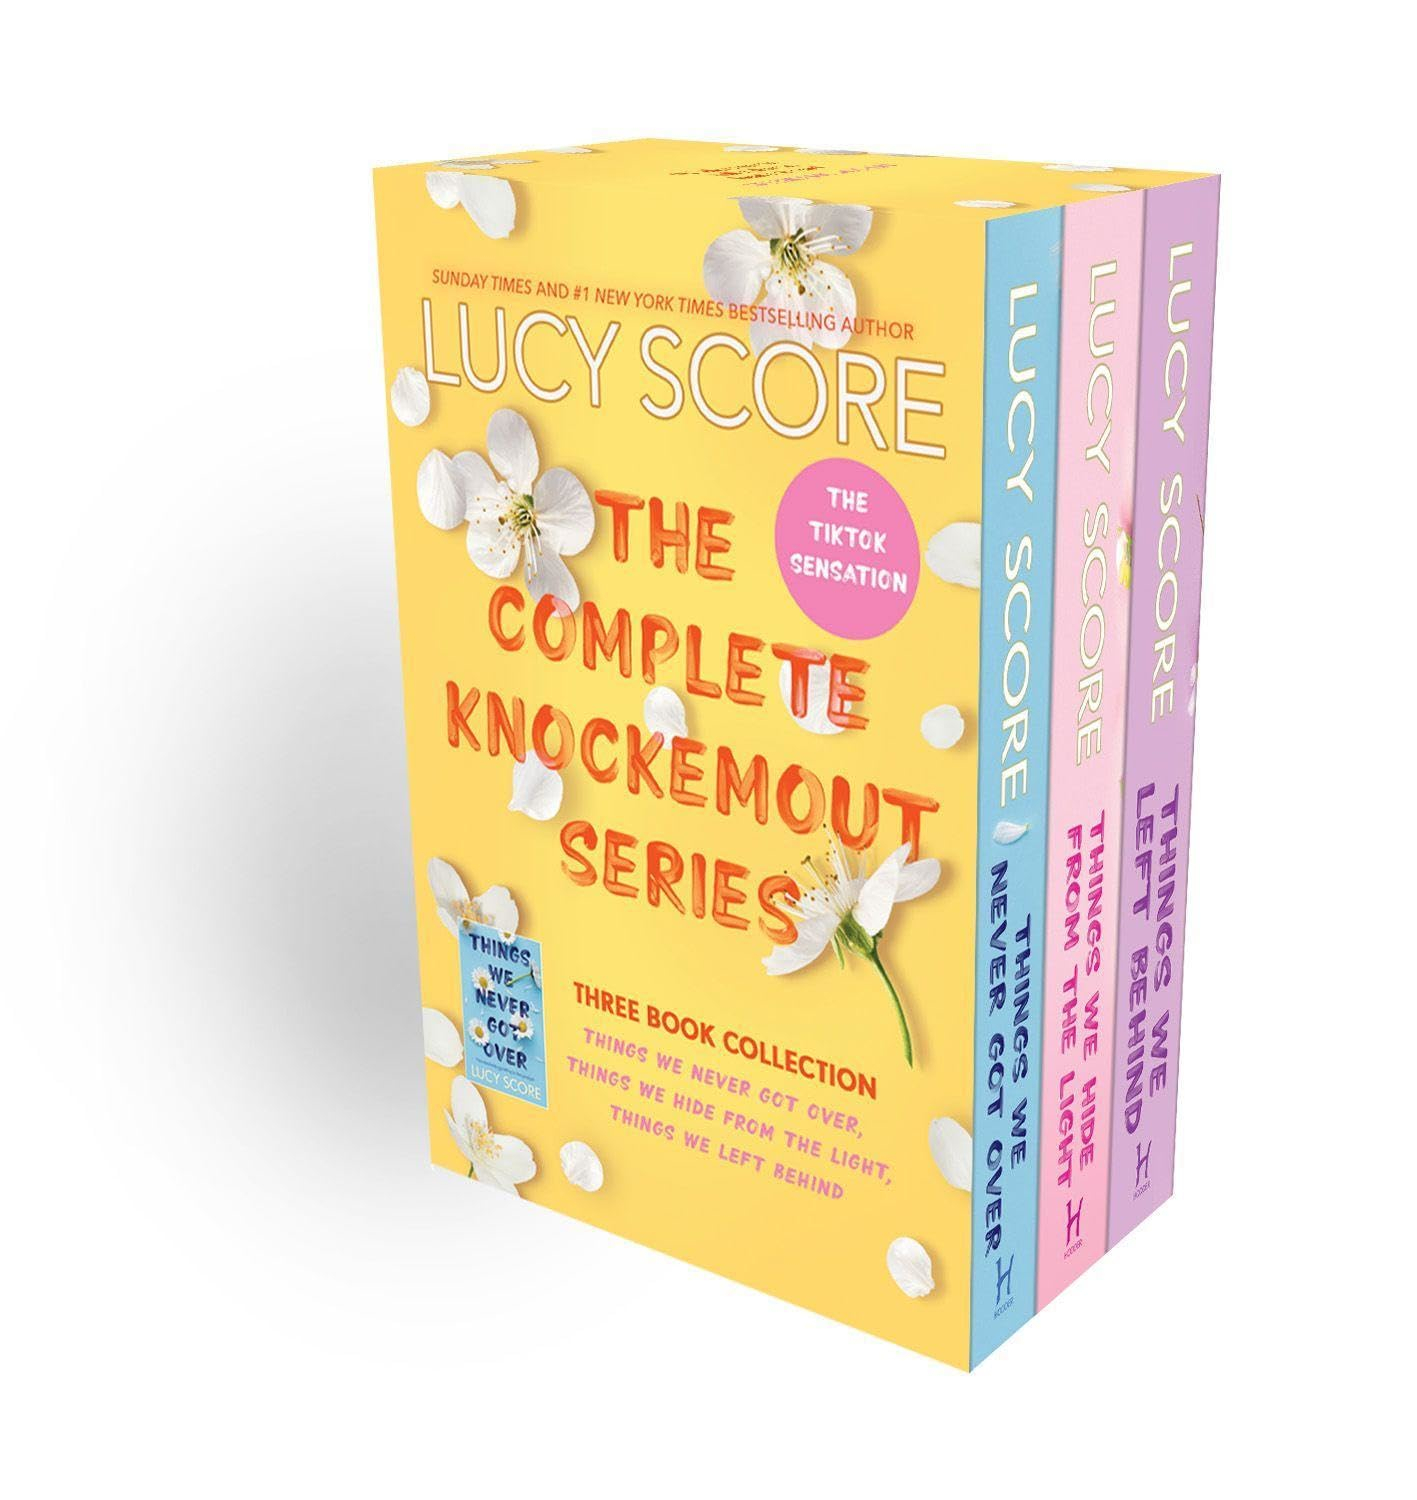 The Knockemout Series Boxset : the complete collection of Things We Never Got Over, Things We Hide From The Light and Things We Left Behind